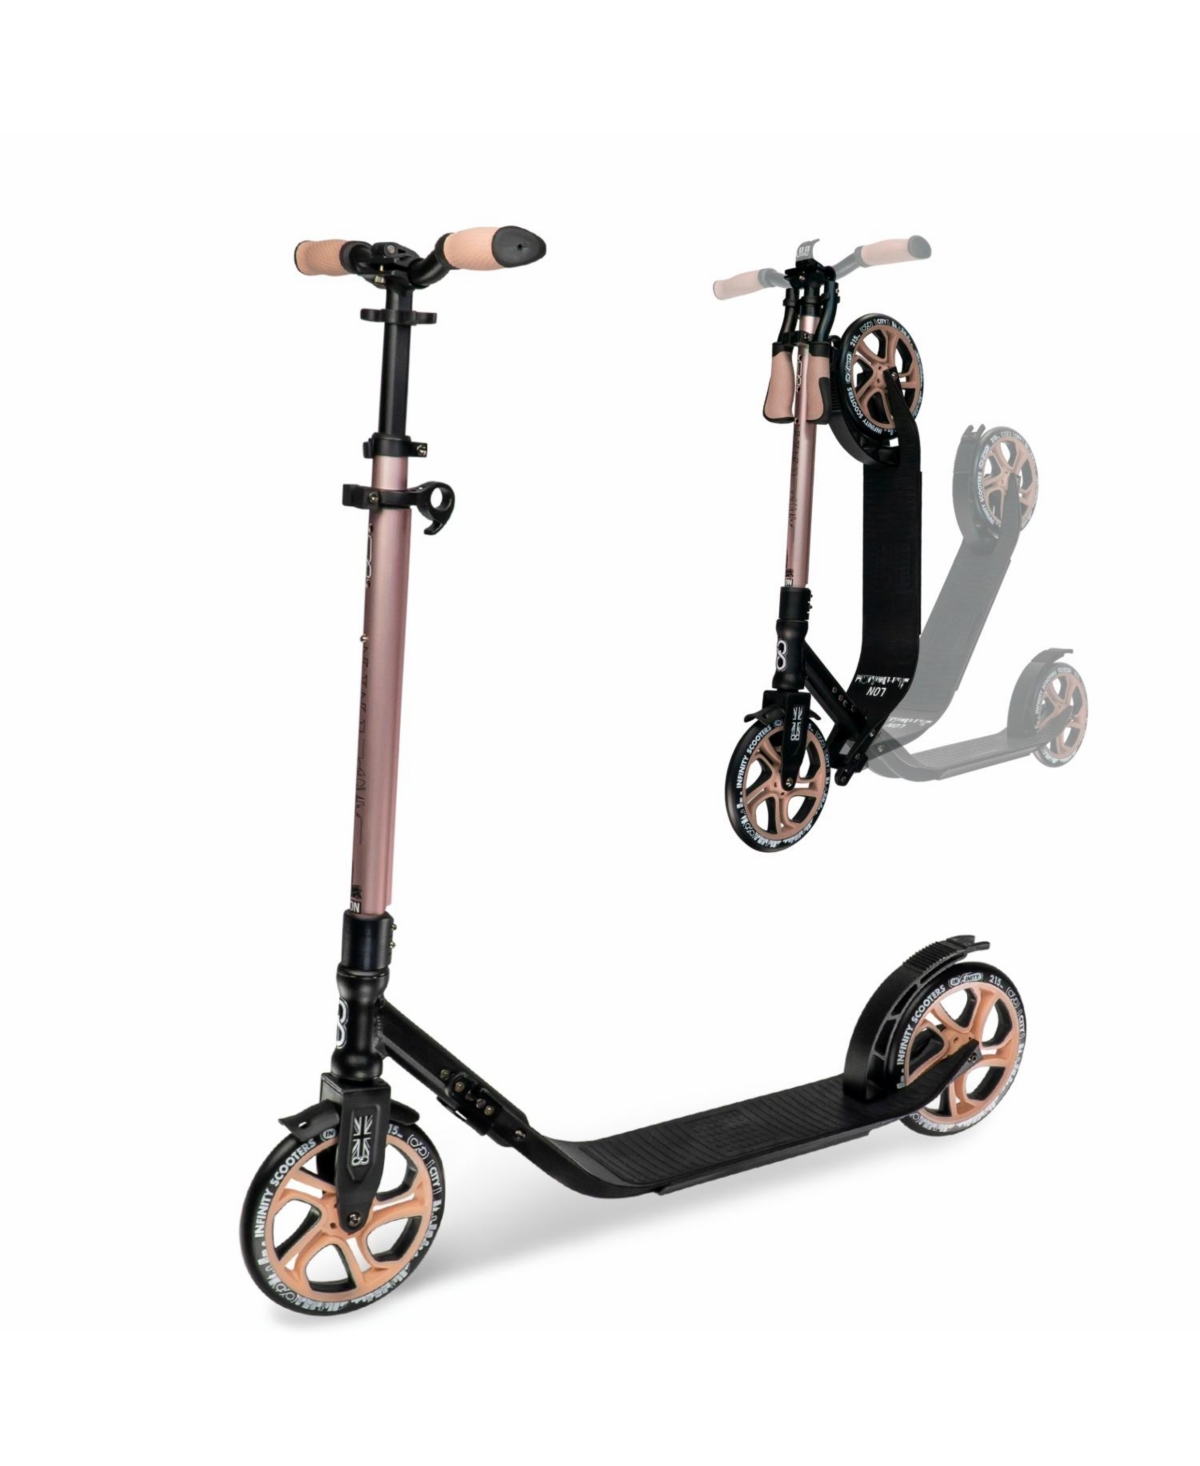 London Foldable Kick Scooter - Great Scooters For Teens And Adults - Gold